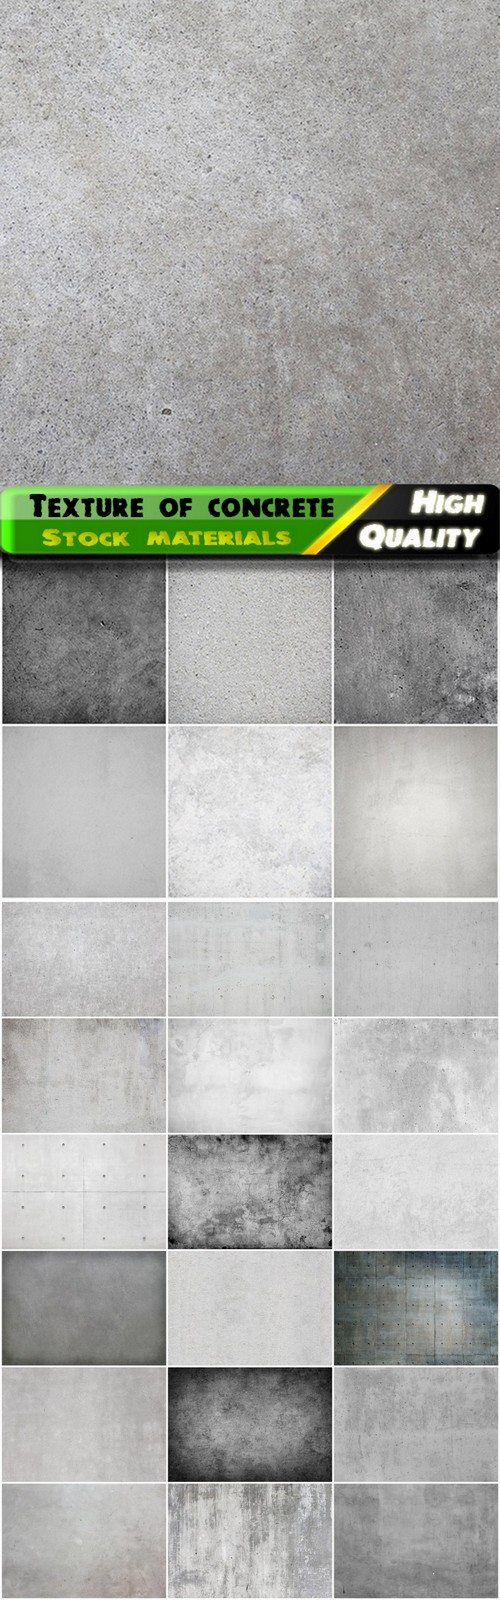 Texture of grungy dark and light gray concrete wall - 25 HQ Jpg